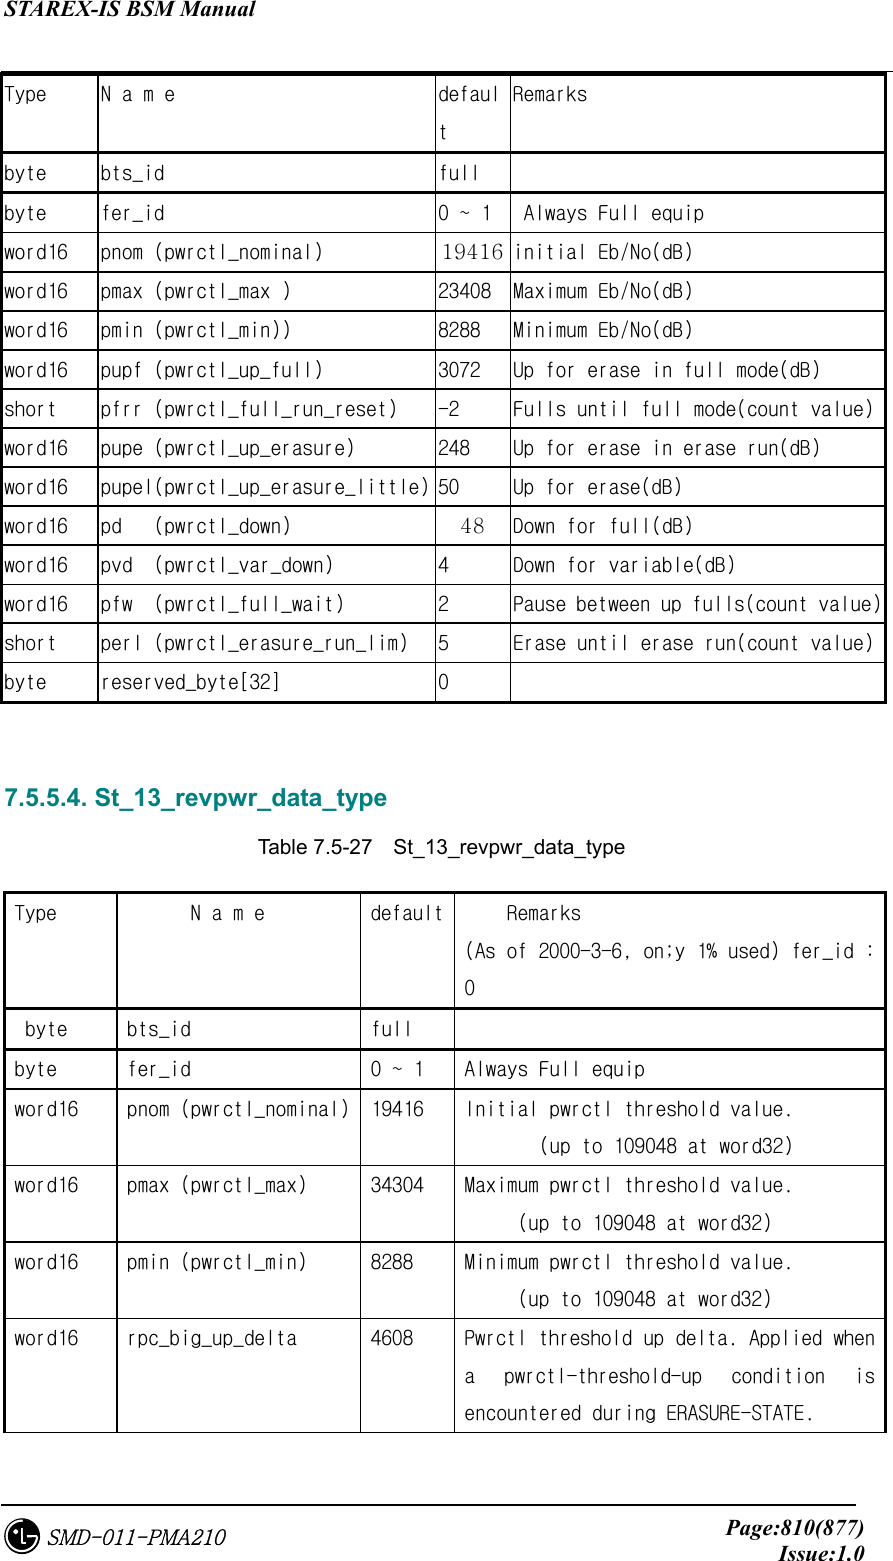 STAREX-IS BSM Manual     Page:810(877)Issue:1.0SMD-011-PMA210 Type  N a m e  default Remarks  byte  bts_id  full   byte  fer_id  0 ~ 1   Always Full equip  word16  pnom (pwrctl_nominal)  19416 initial Eb/No(dB) word16  pmax (pwrctl_max )  23408  Maximum Eb/No(dB) word16  pmin (pwrctl_min))  8288  Minimum Eb/No(dB) word16  pupf (pwrctl_up_full)  3072  Up for erase in full mode(dB) short  pfrr (pwrctl_full_run_reset)  -2  Fulls until full mode(count value) word16  pupe (pwrctl_up_erasure)  248  Up for erase in erase run(dB) word16  pupel(pwrctl_up_erasure_little) 50  Up for erase(dB) word16  pd   (pwrctl_down)  48  Down for full(dB) word16  pvd  (pwrctl_var_down)  4  Down for variable(dB) word16  pfw  (pwrctl_full_wait)  2  Pause between up fulls(count value) short  perl (pwrctl_erasure_run_lim)  5  Erase until erase run(count value) byte  reserved_byte[32]  0     7.5.5.4. St_13_revpwr_data_type   Table 7.5-27  St_13_revpwr_data_type     Remarks  Type        N a m e  default (As of 2000-3-6, on;y 1% used) fer_id : 0  byte  bts_id  full   byte  fer_id  0 ~ 1  Always Full equip  word16  pnom (pwrctl_nominal)  19416  Initial pwrctl threshold value.        (up to 109048 at word32) word16  pmax (pwrctl_max)  34304  Maximum pwrctl threshold value.      (up to 109048 at word32) word16  pmin (pwrctl_min)  8288  Minimum pwrctl threshold value.      (up to 109048 at word32) word16  rpc_big_up_delta  4608  Pwrctl threshold up delta. Applied when a  pwrctl-threshold-up  condition  is encountered during ERASURE-STATE. 